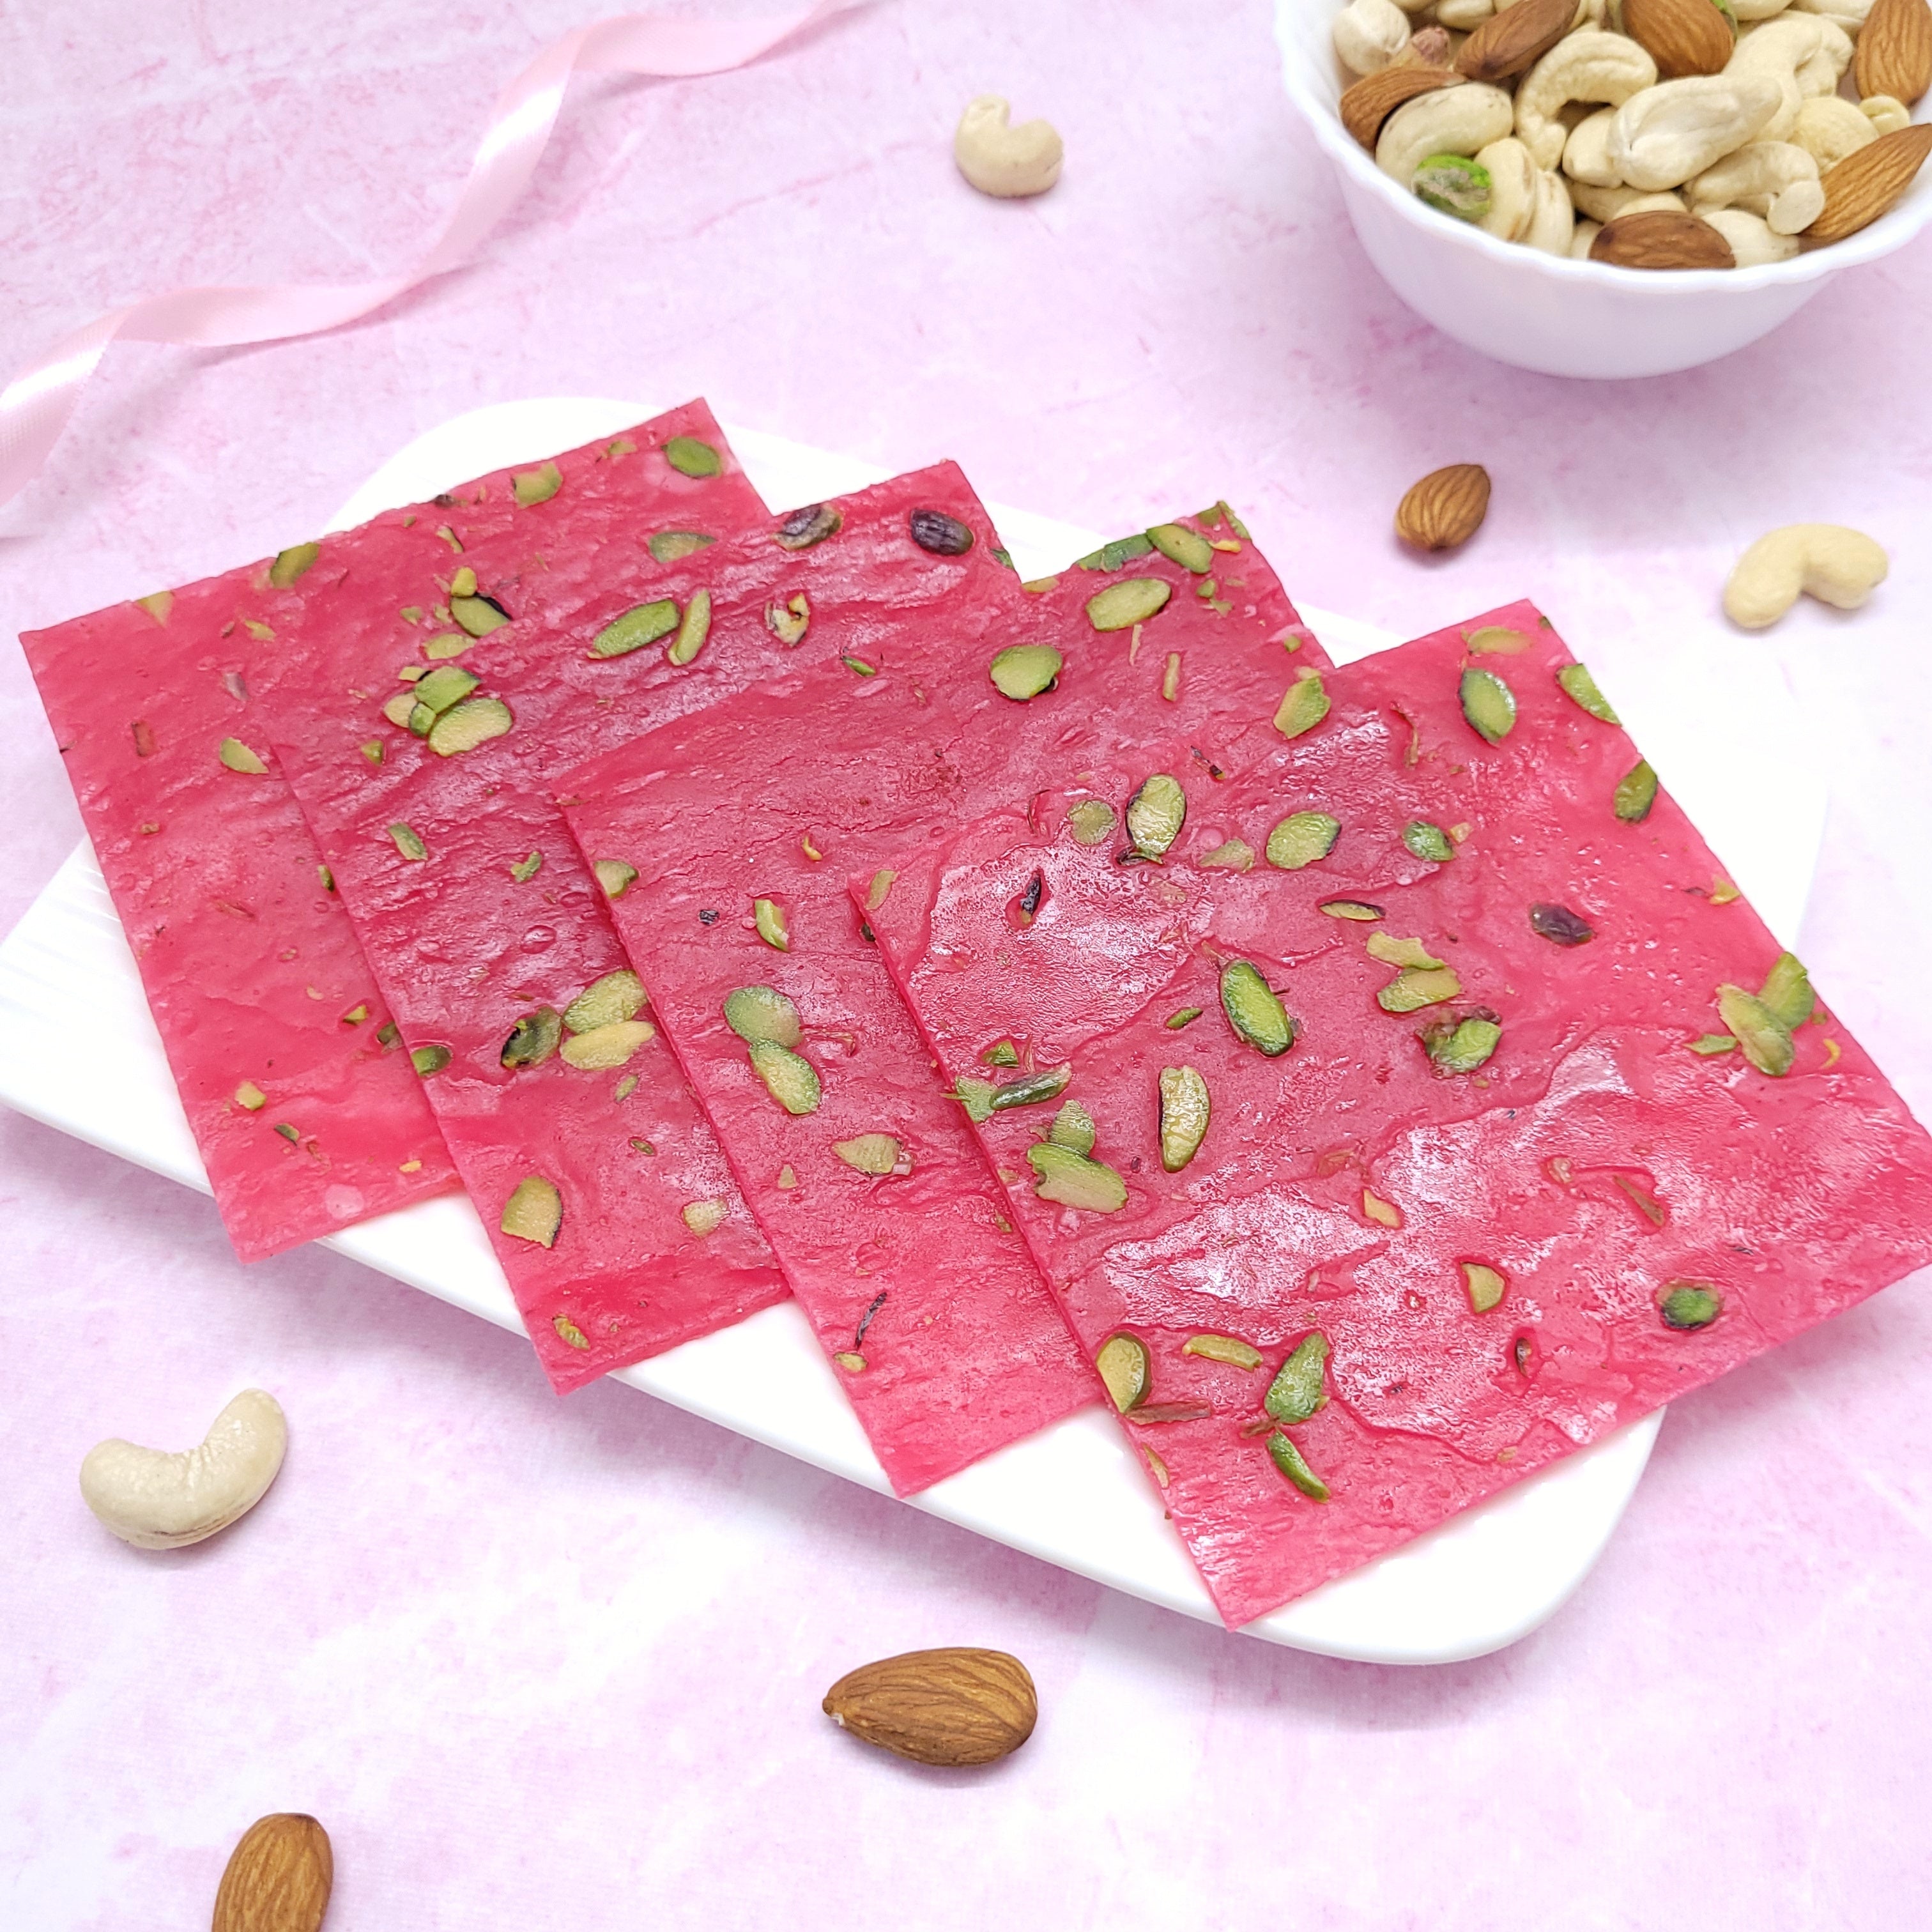 Delicious Mumbai Halwa Guava from Heerson